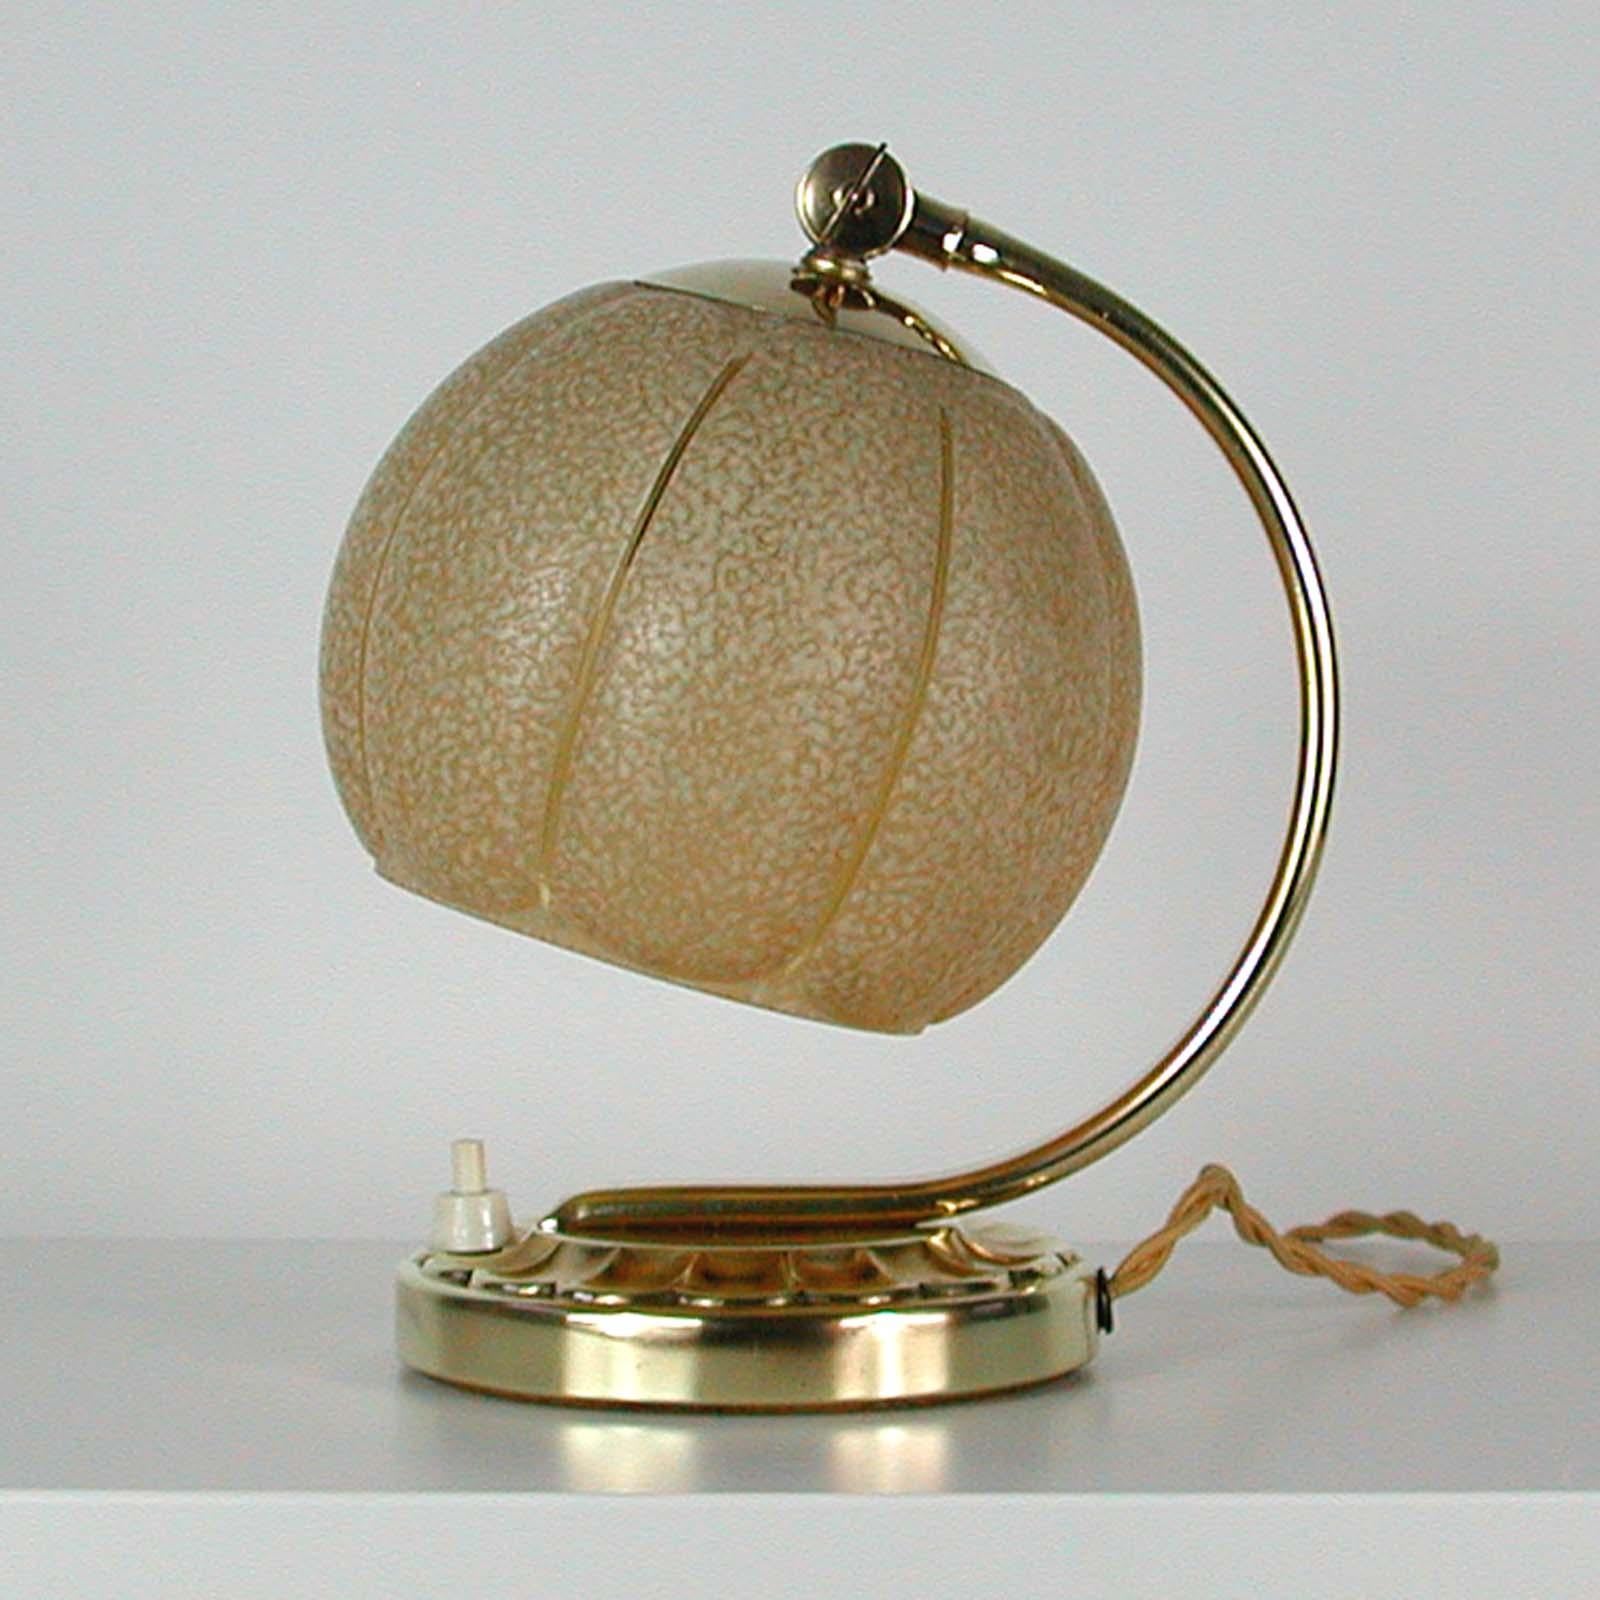 This pretty vintage table or bedside lamp was made in Germany in the 1930s during the Bauhaus period. It is made of brass and has got an adjustable lamp shade made of cream colored textured glass.

Marked DRGM (Deutsches Reich Gebrauchs Muster: